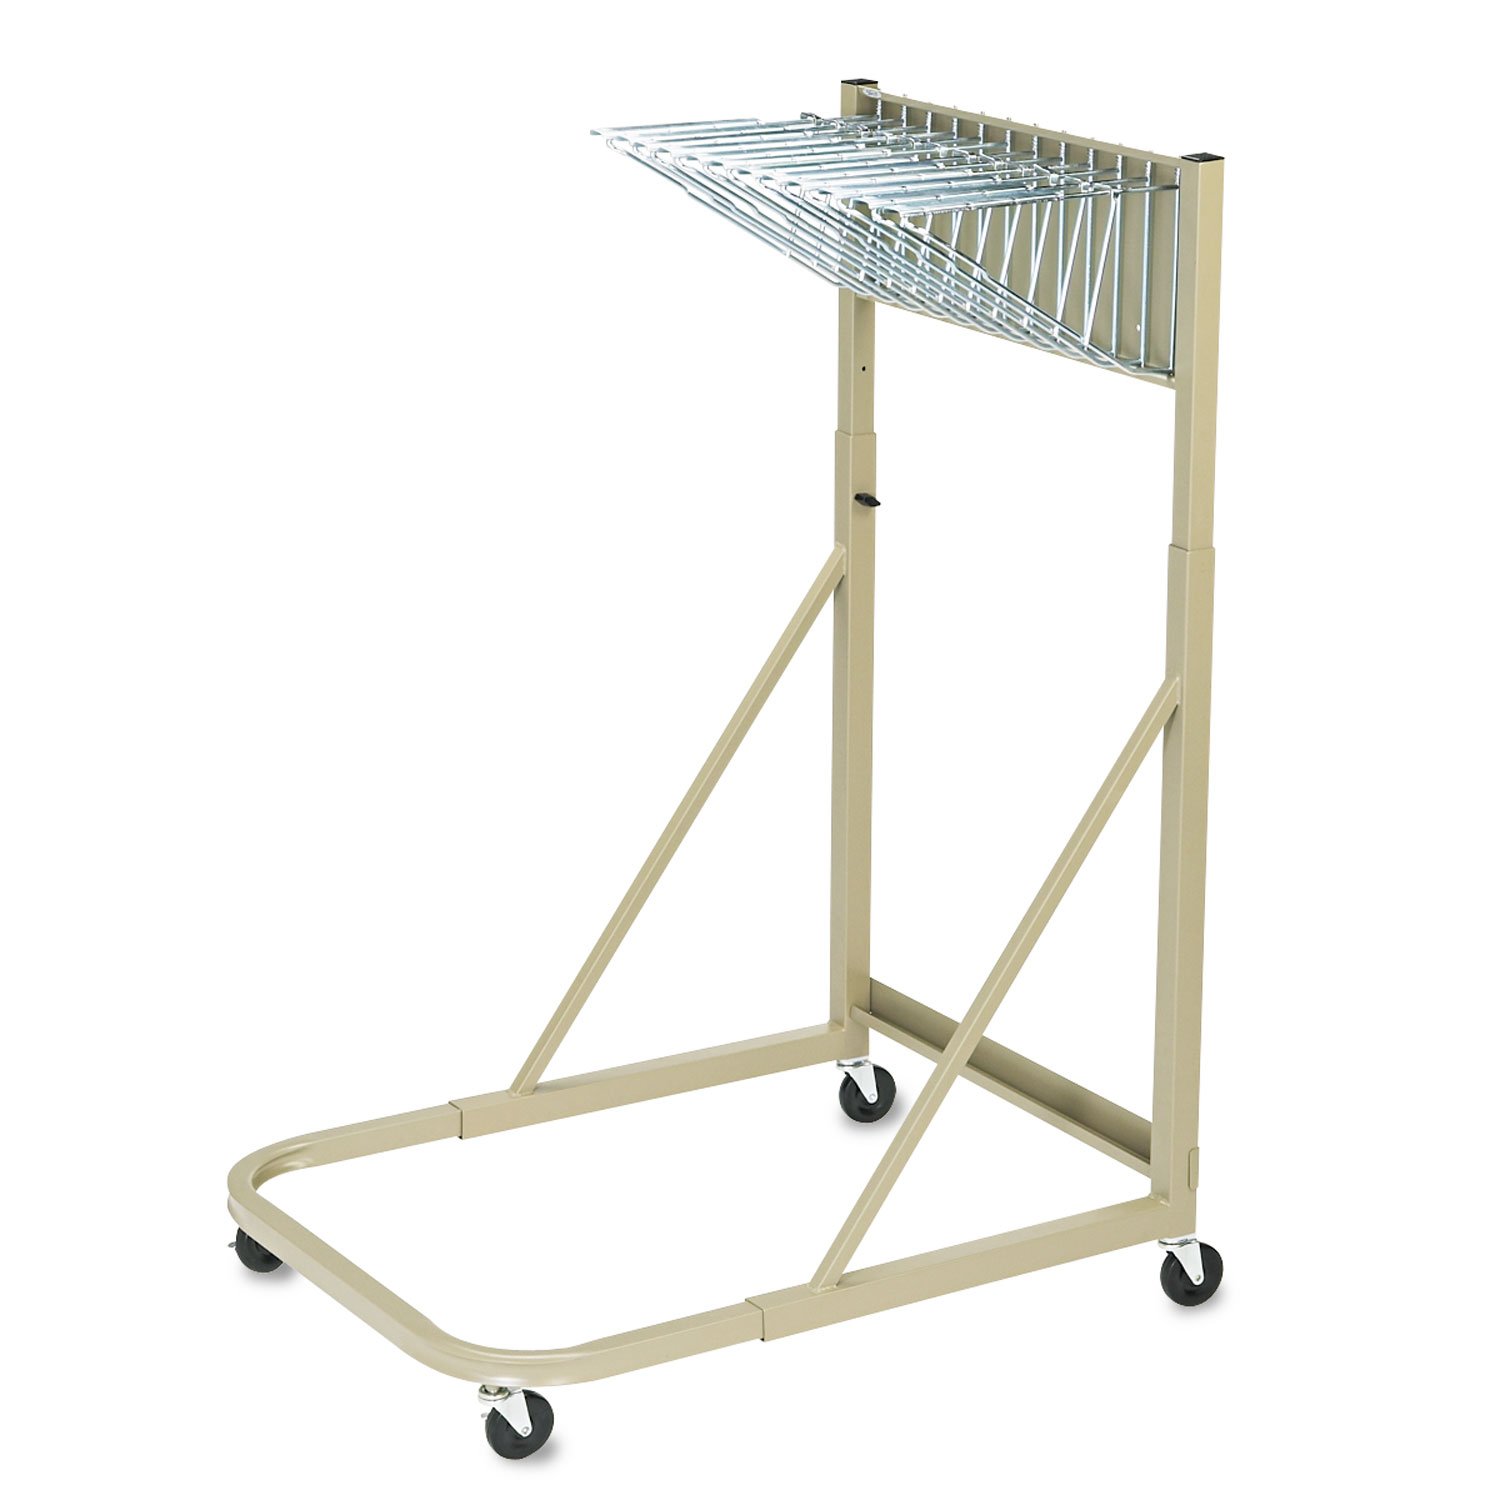 Steel Sheet File Mobile Rack, 12 Hanging Clamps, 27w x 37 1/2d x 61 1/2h, Sand